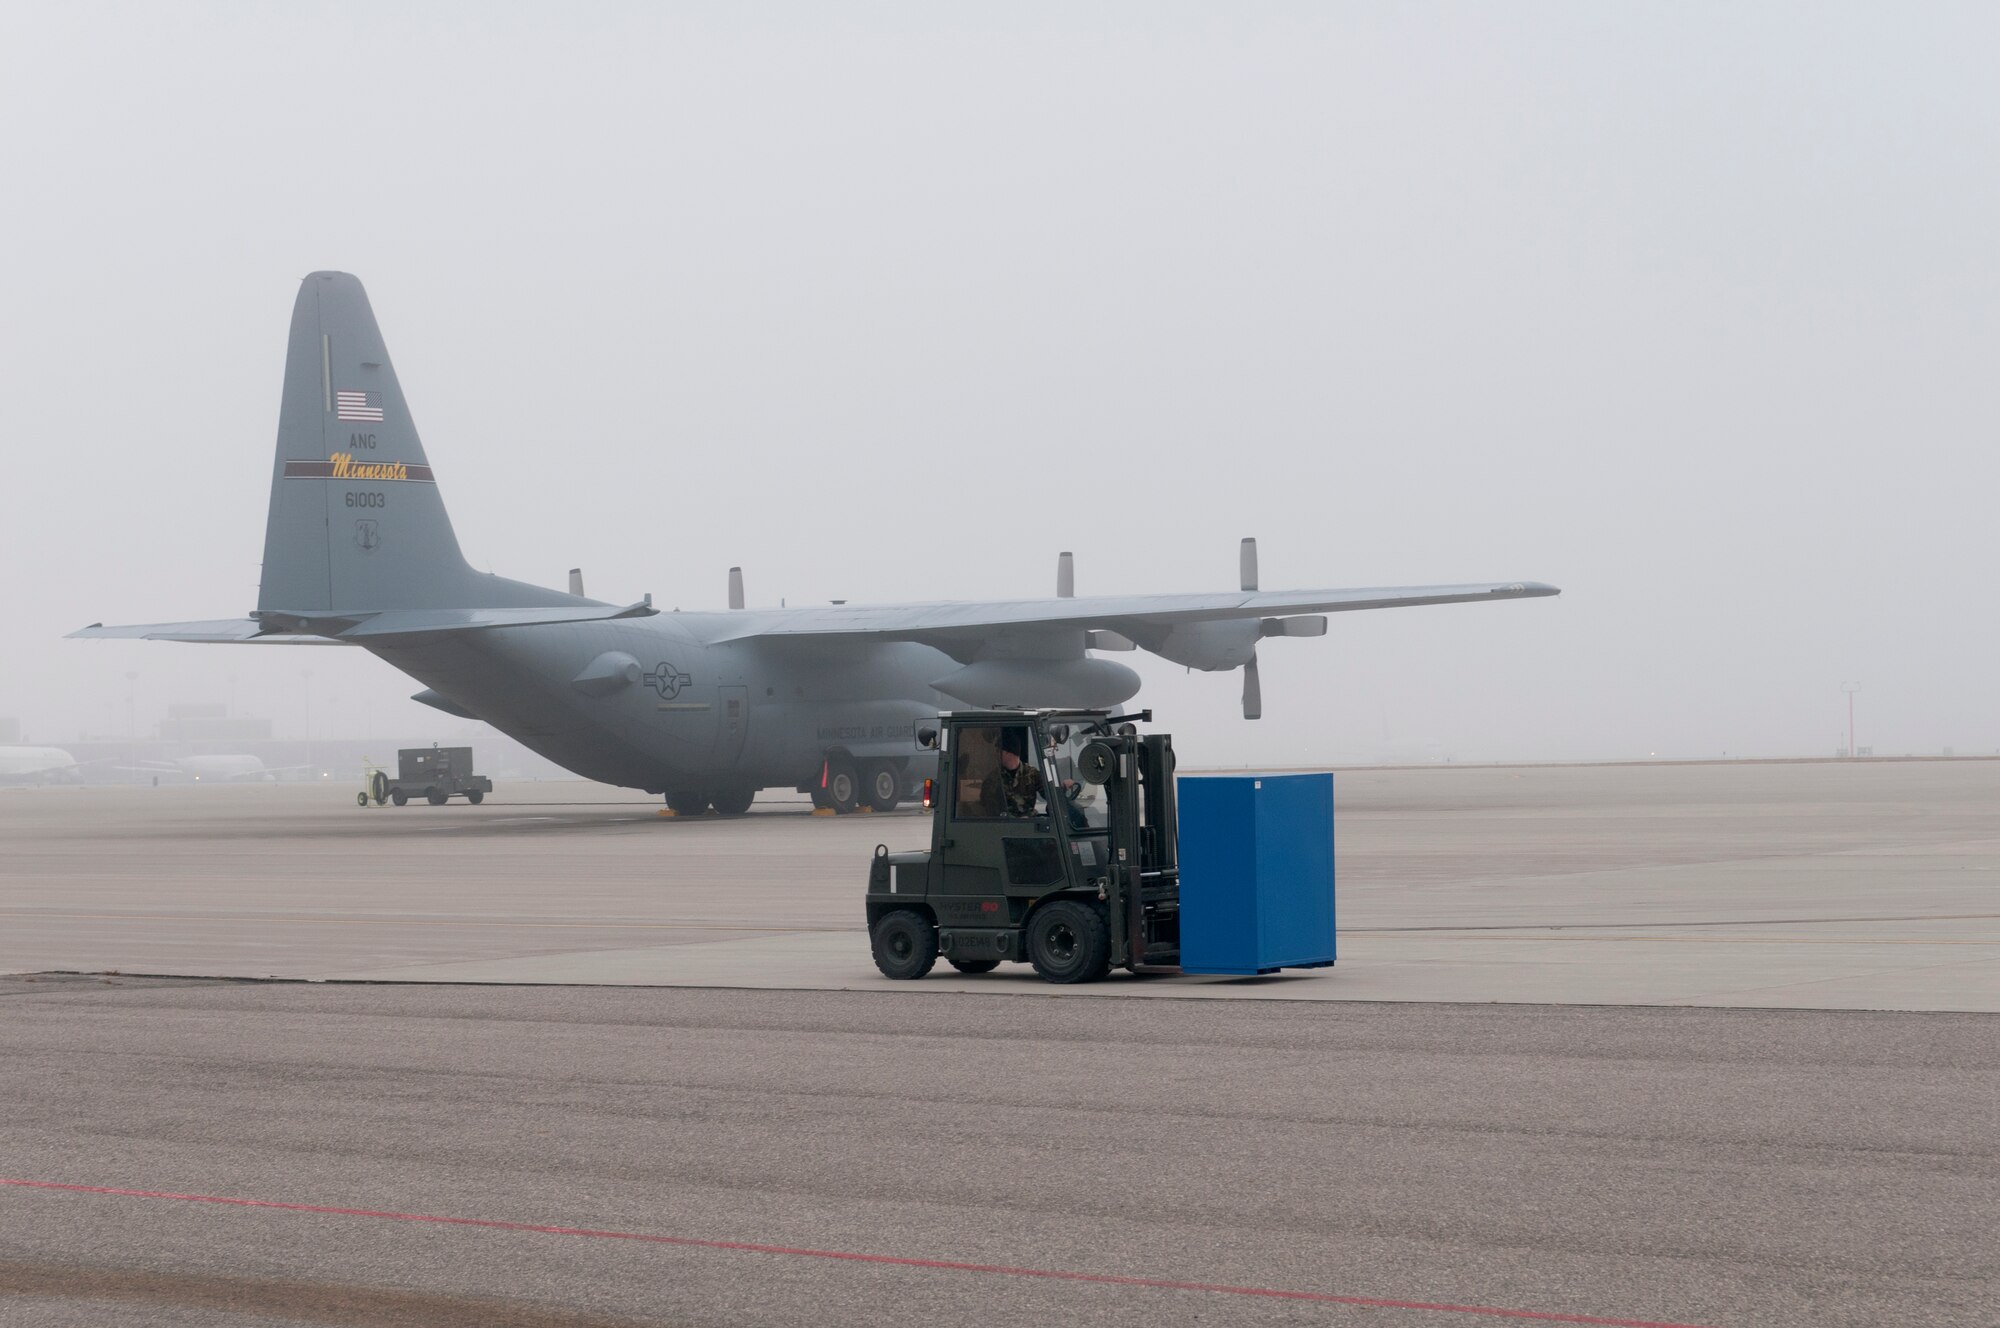 As fog lifts above the flightline at the Minneapolis – St. Paul international airport, Technical Sgt. Eric Moan of the 133rd Aircraft Maintenance Squadron drives a forklift in front a Minnesota Air National Guard C-130 “Hercules” on Oct. 31, 2011. Moan is one of dozens of Airmen on base wearing the Battle Dress Uniform on the last official day the Air Force allows BDUs to be worn. USAF official photo by Senior Master Sgt. Mark Moss